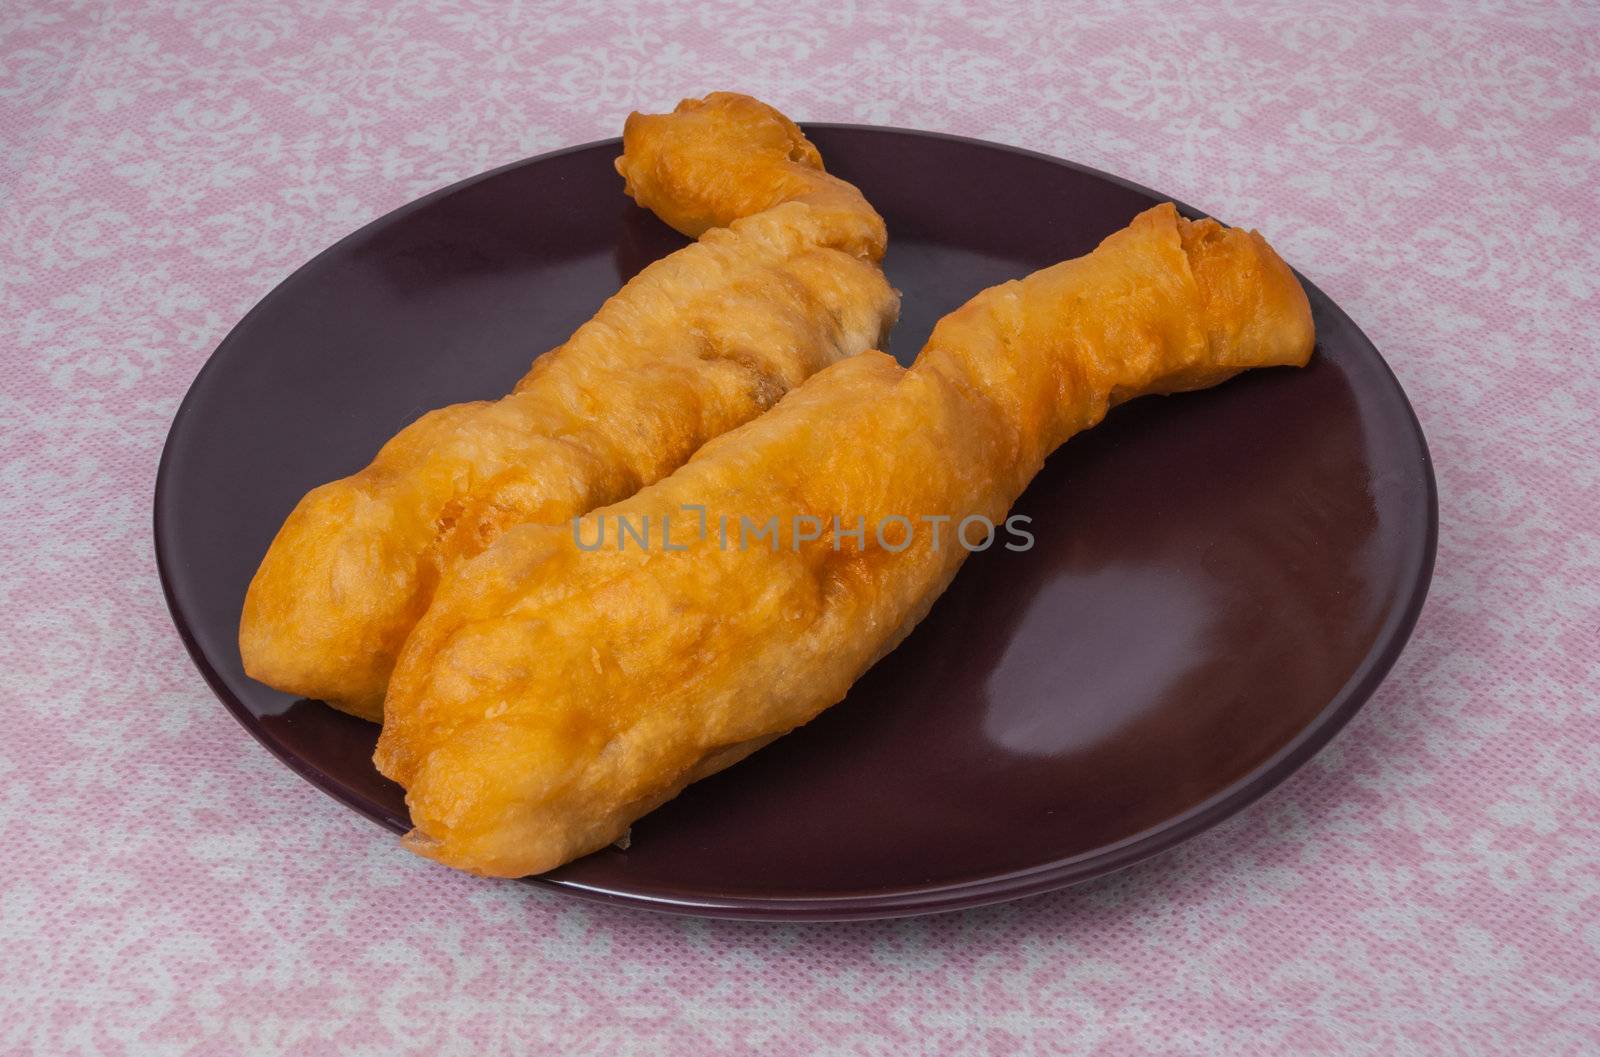 Youtiao (Chinese name) is very famous in Southeast Asia especially Chinese where the origin country of Youtiao. In Thailand, it is generally called Pathongko due to a confusion with a different kind of dessert. Youtiao called Chinese oil stick, Chinese donut, Chinese cruller, fried bread stick- is a long, golden-brown, deep fried strip of dough. Youtiao or Pathongko is lightly salted and made so they can be torn lengthwise in two. Youtiao are normally eaten as an accompaniment for rice congee or soy milk. In Thailand, Pathongko is also dipped into condensed milk or, in the South, eaten with kaya.